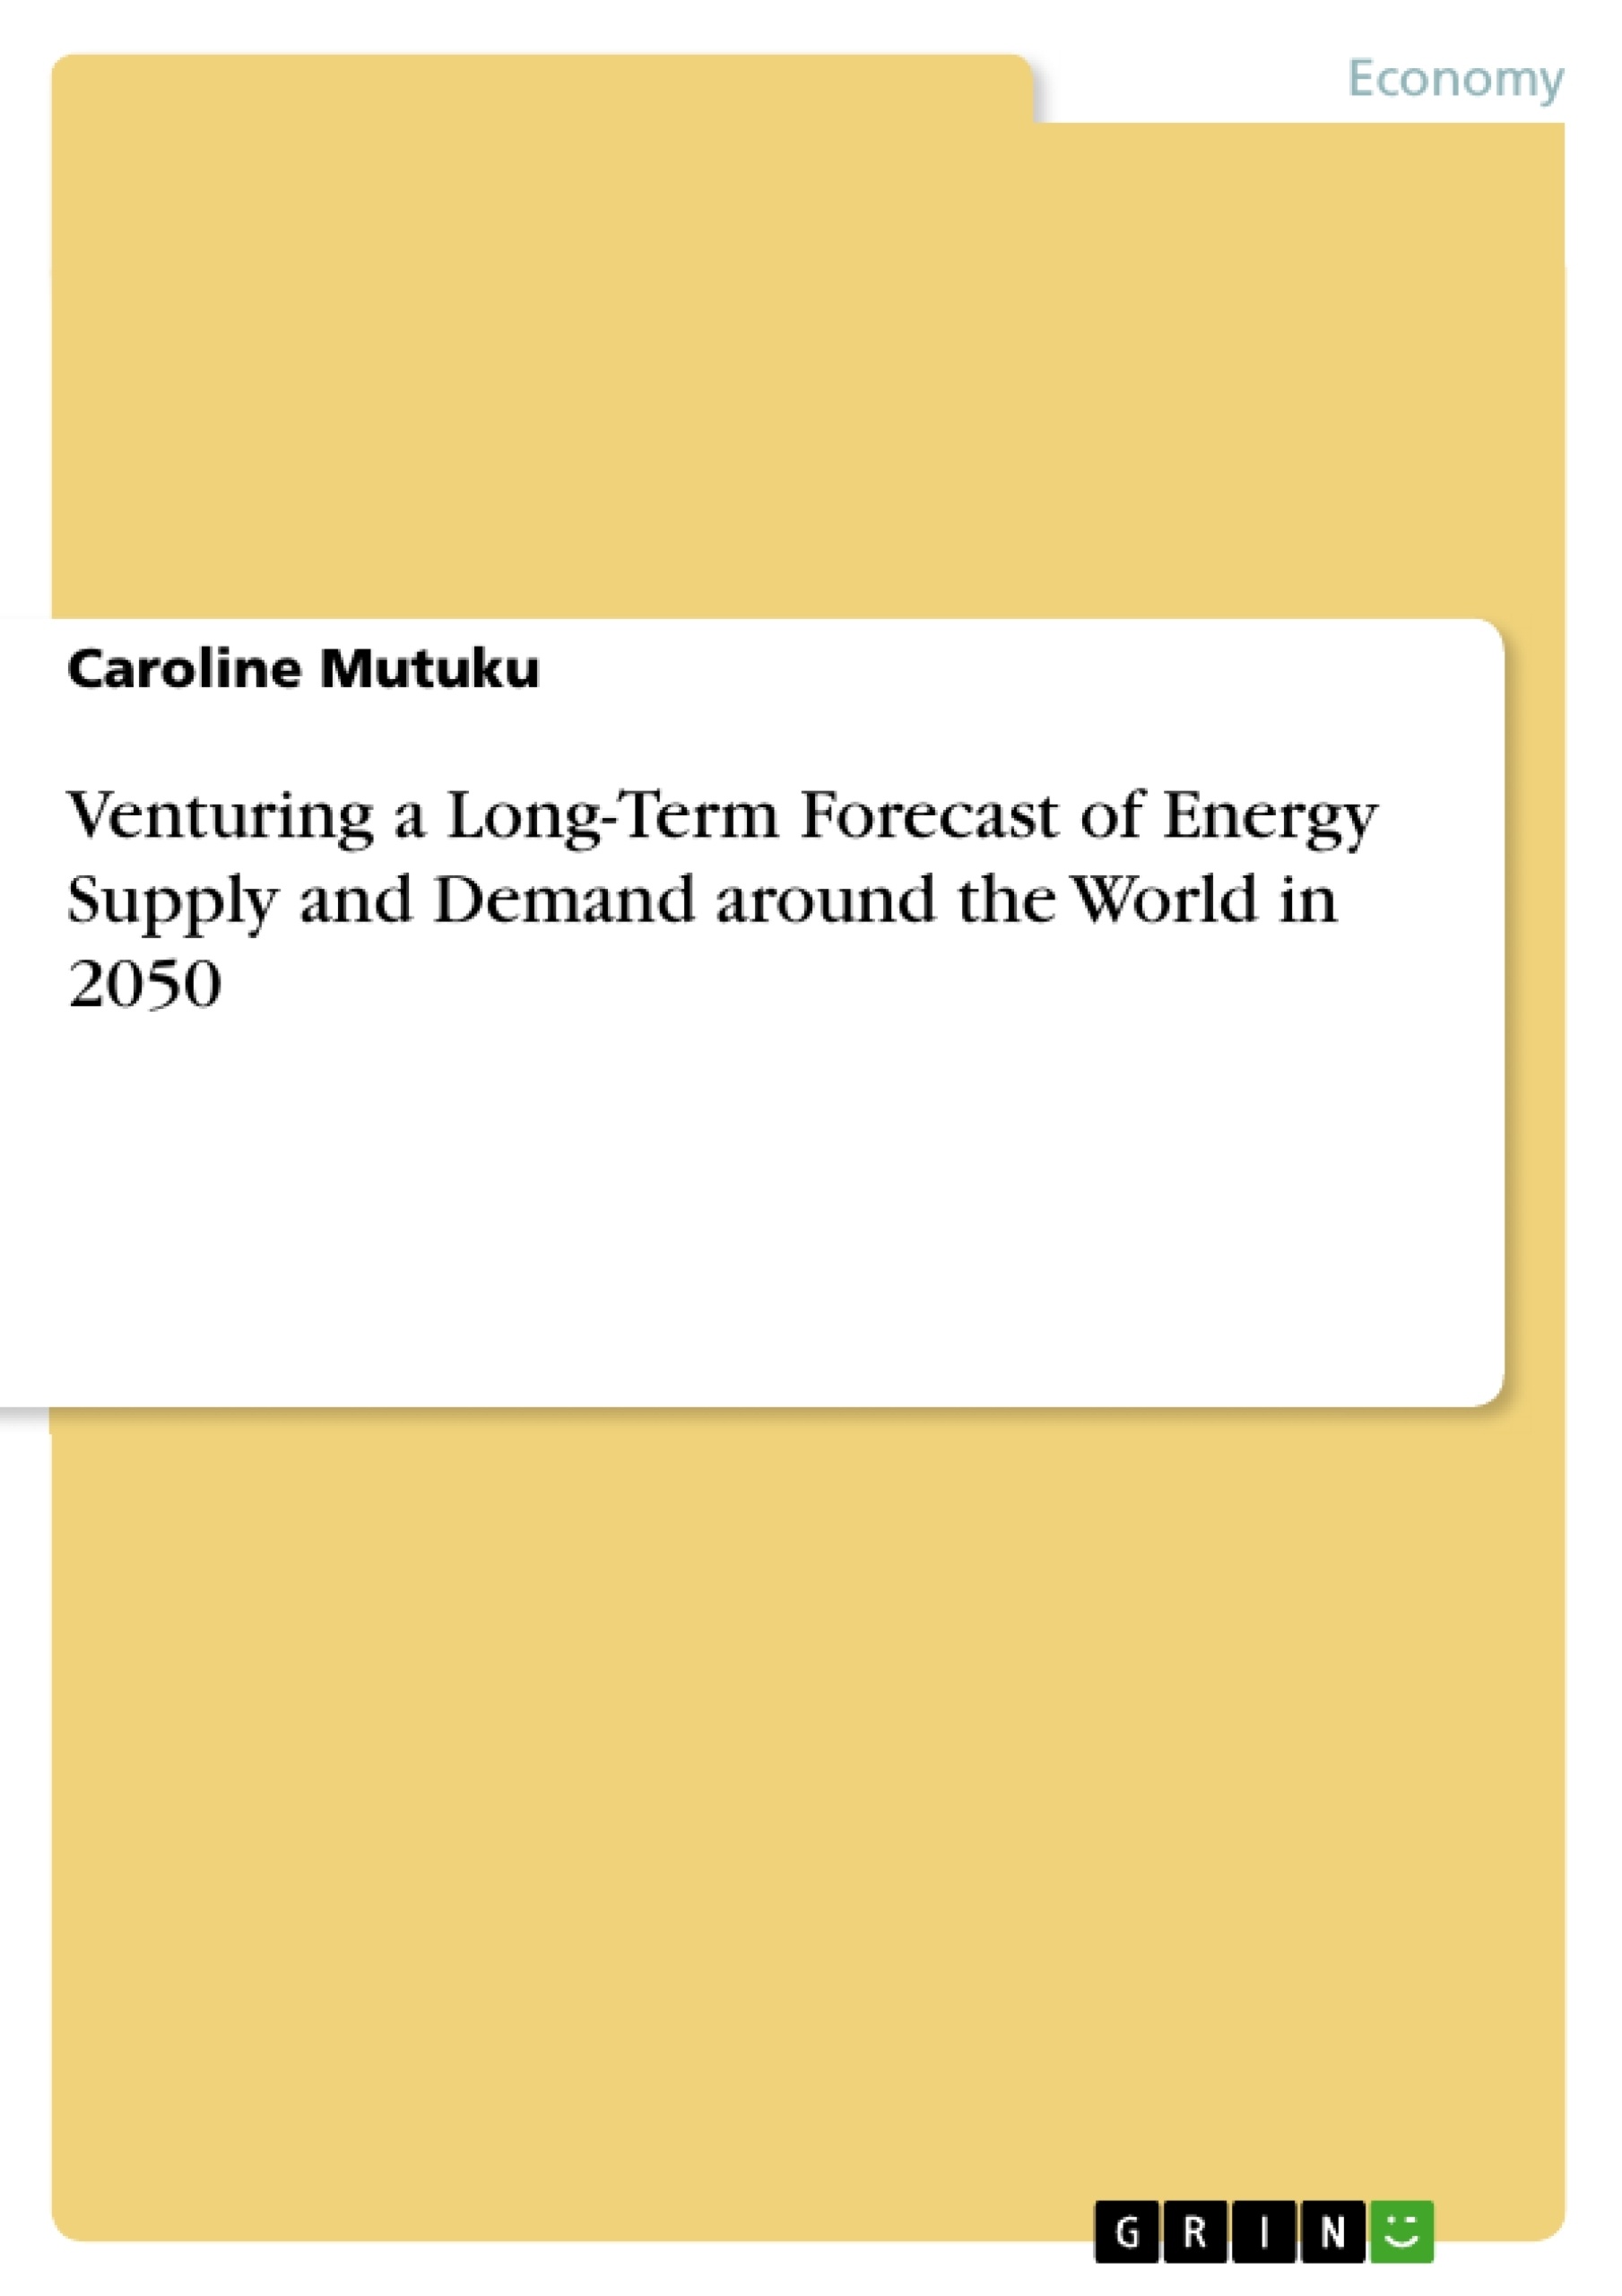 Title: Venturing a Long-Term Forecast of Energy Supply and Demand around the World in 2050